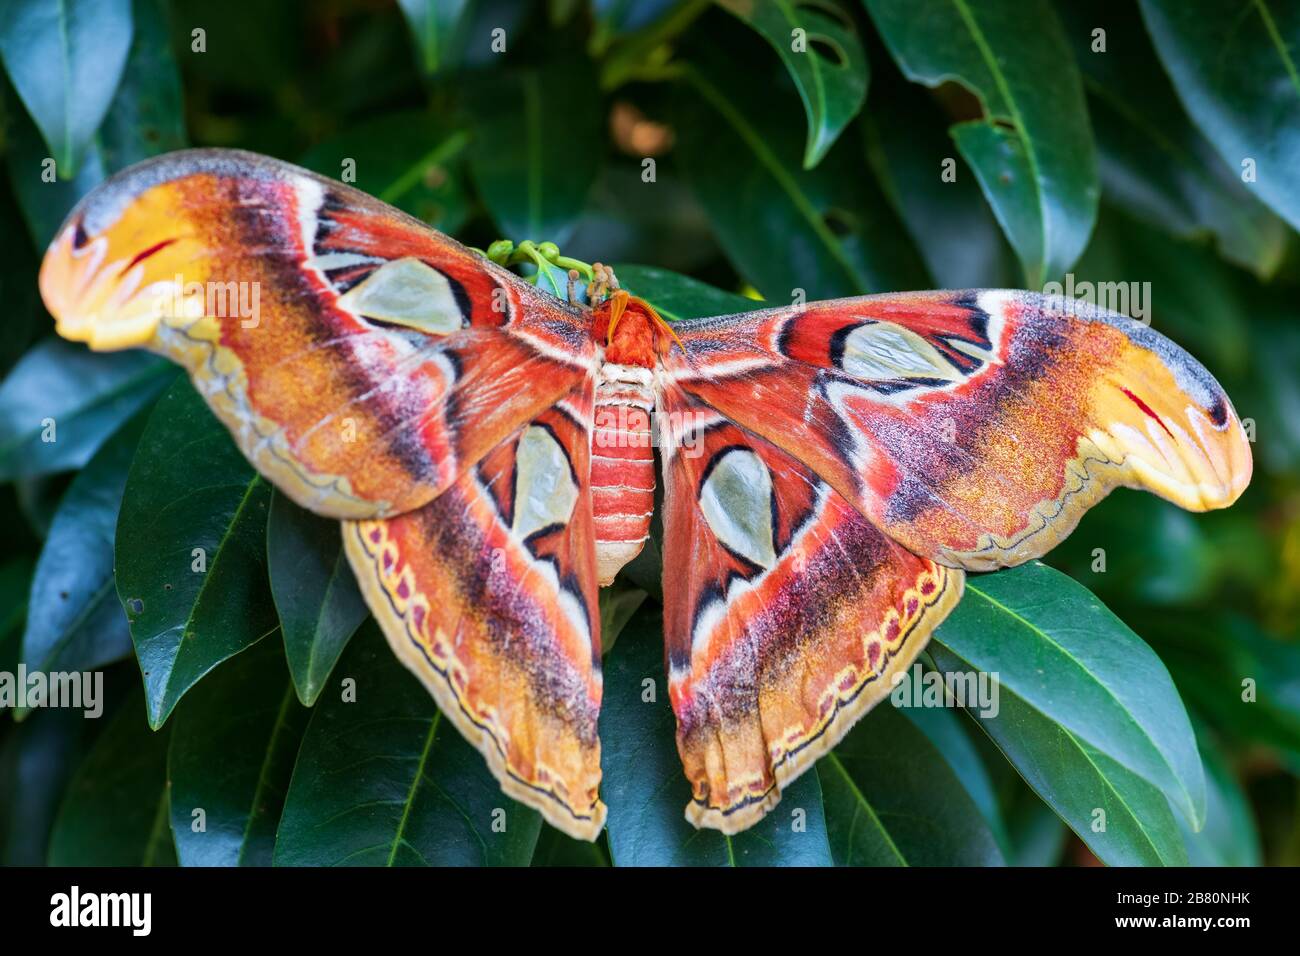 Atlas Moth - Attacus atlas, beautiful large iconic moth from Asian forests and woodlands, Borneo, Indonesia. Stock Photo